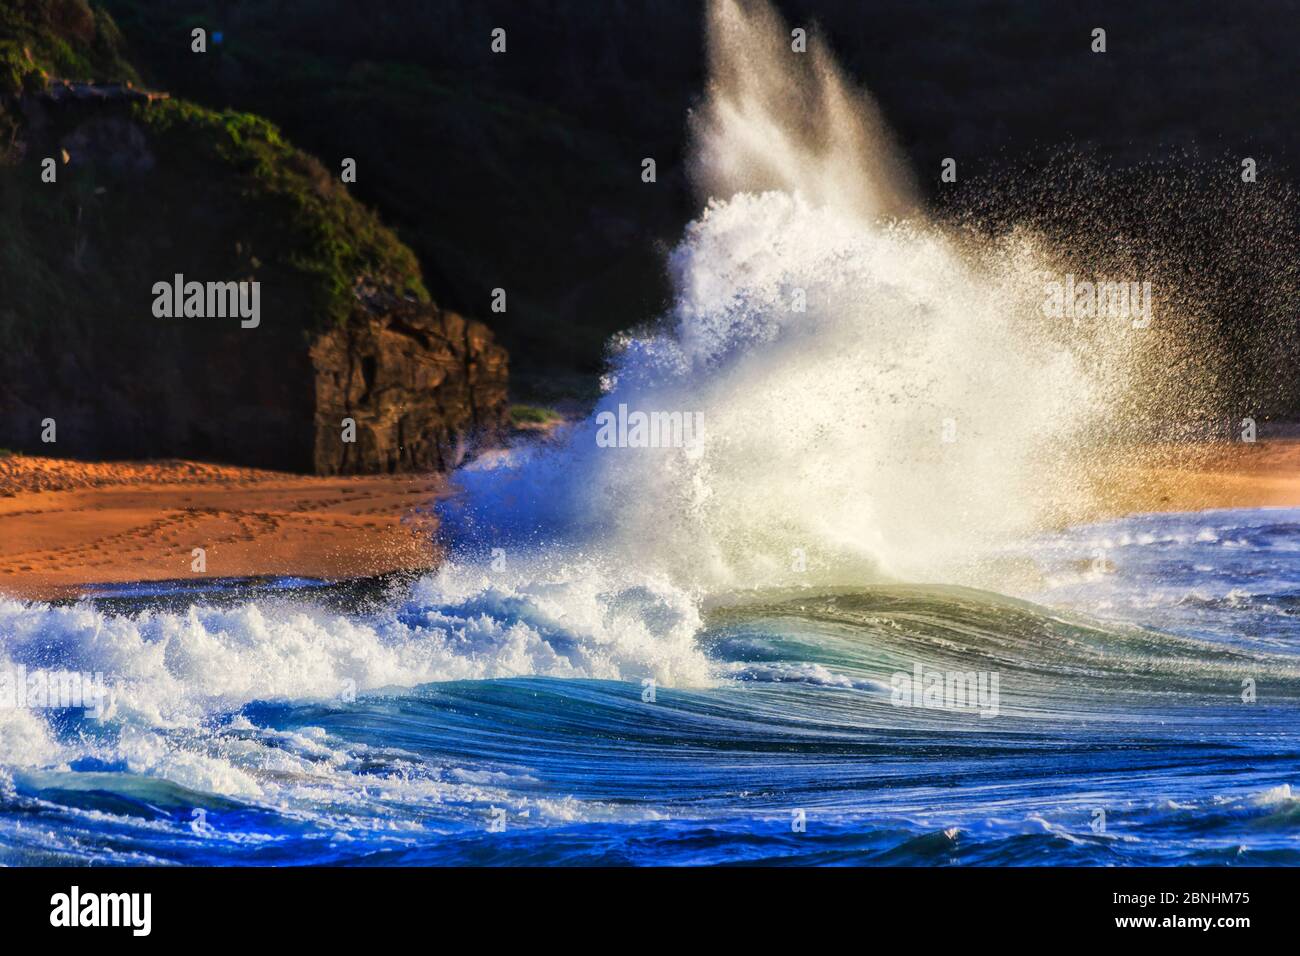 Strong powerful wave rolling on shore of Sydney Northern beaches at sunrise against dark headland. Stock Photo